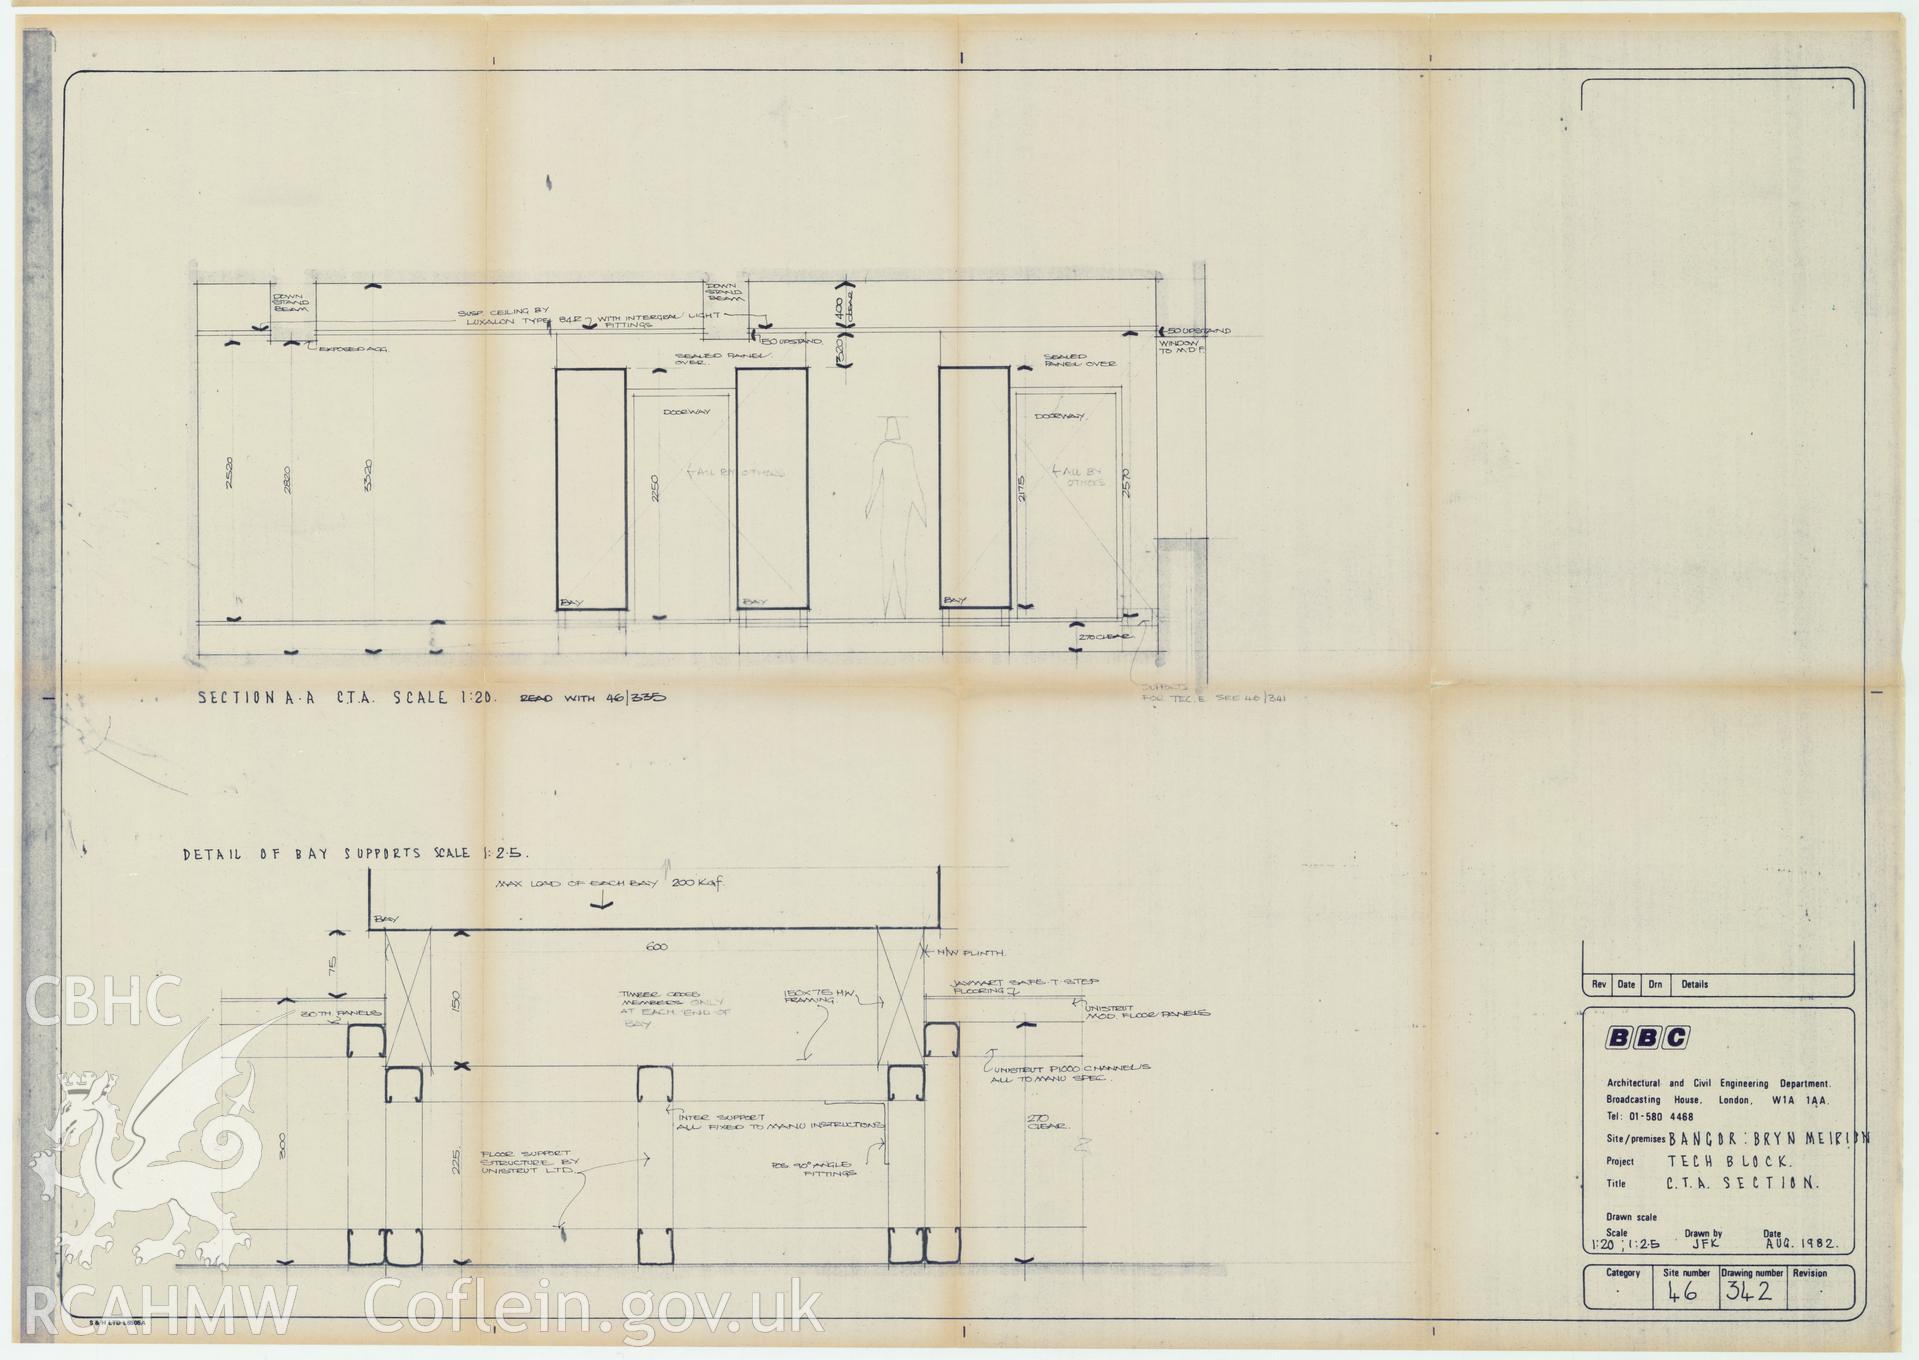 BBC premises, Bryn Meirion, Bangor - section drawing of Technology Block C.T.A. Drawing No. 46/342, August 1982.